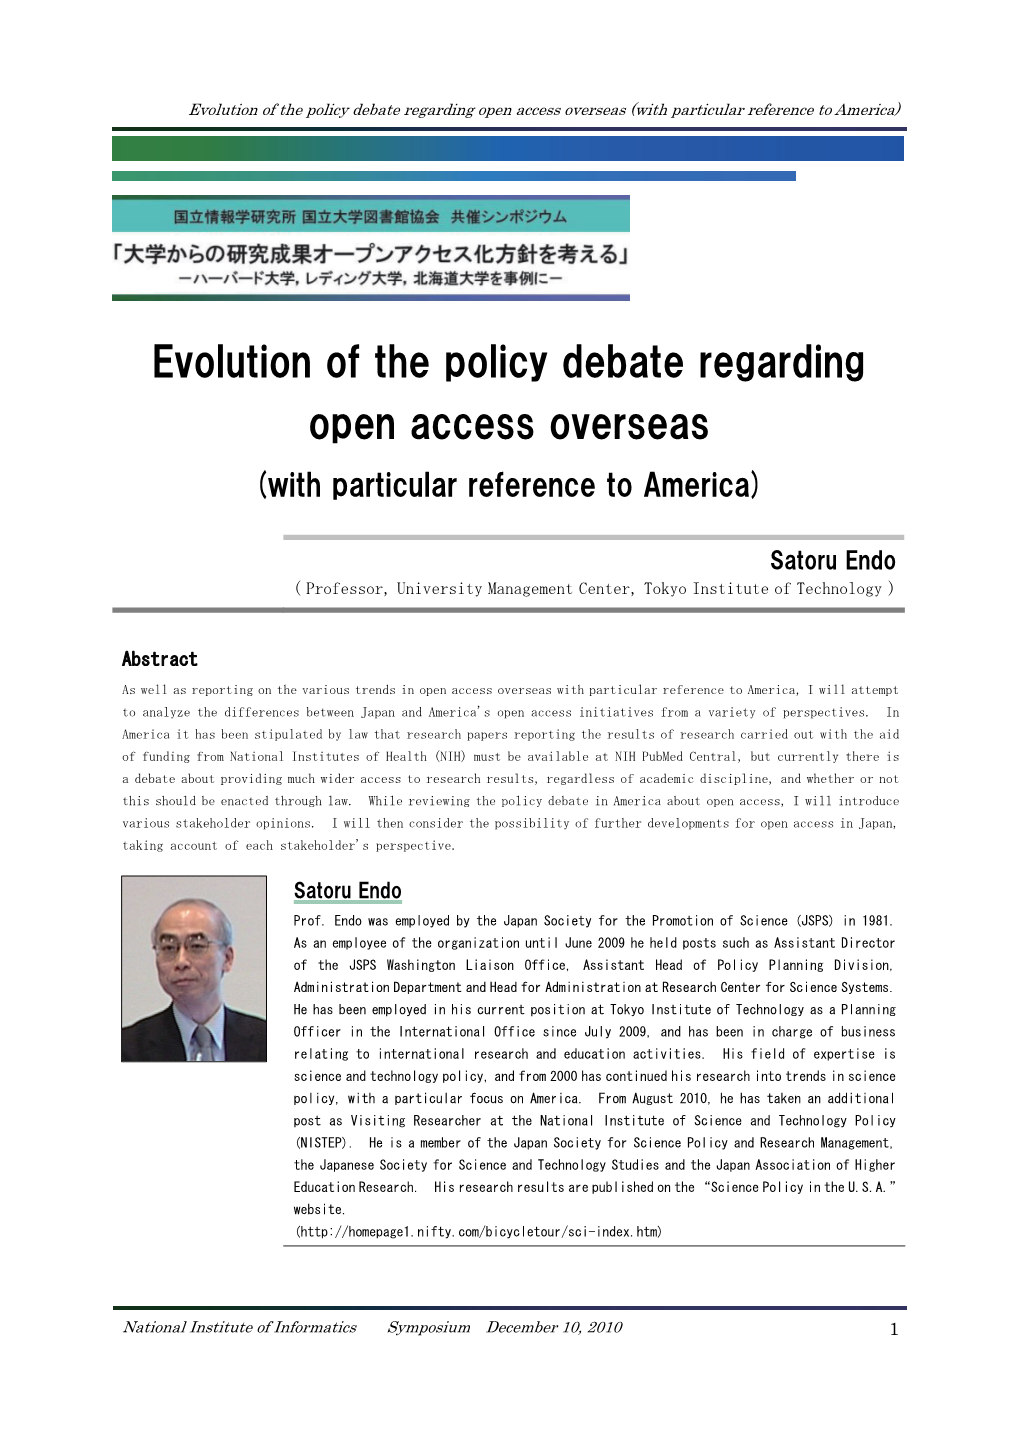 Evolution of the Policy Debate Regarding Open Access Overseas (With Particular Reference to America)